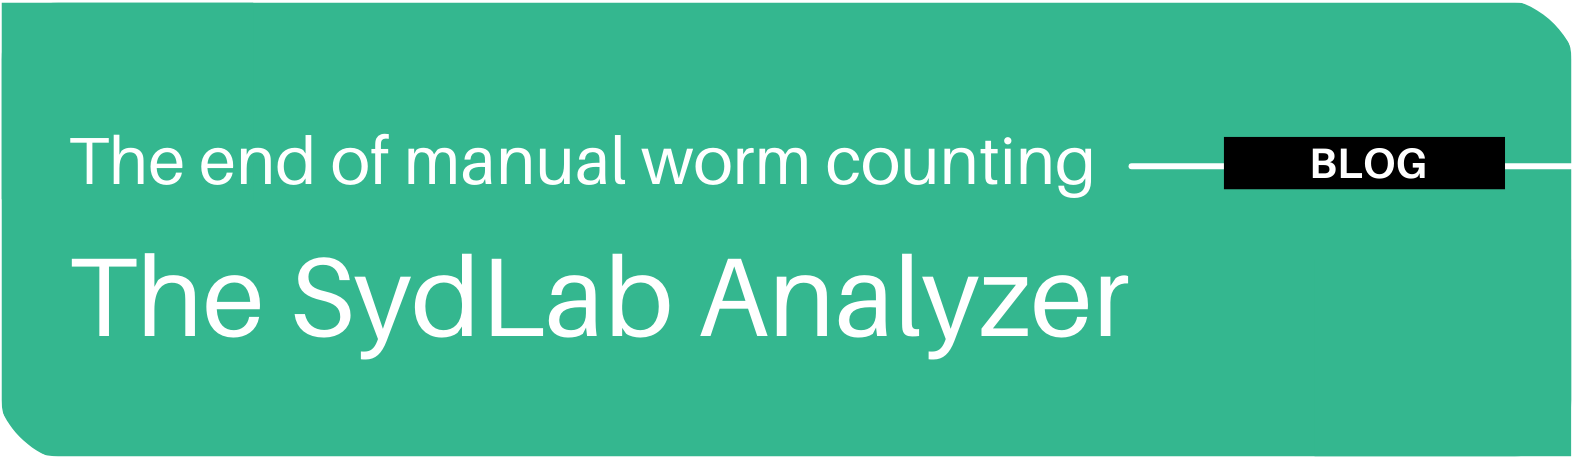 The end of manual worm counting. SydLab Analyzer